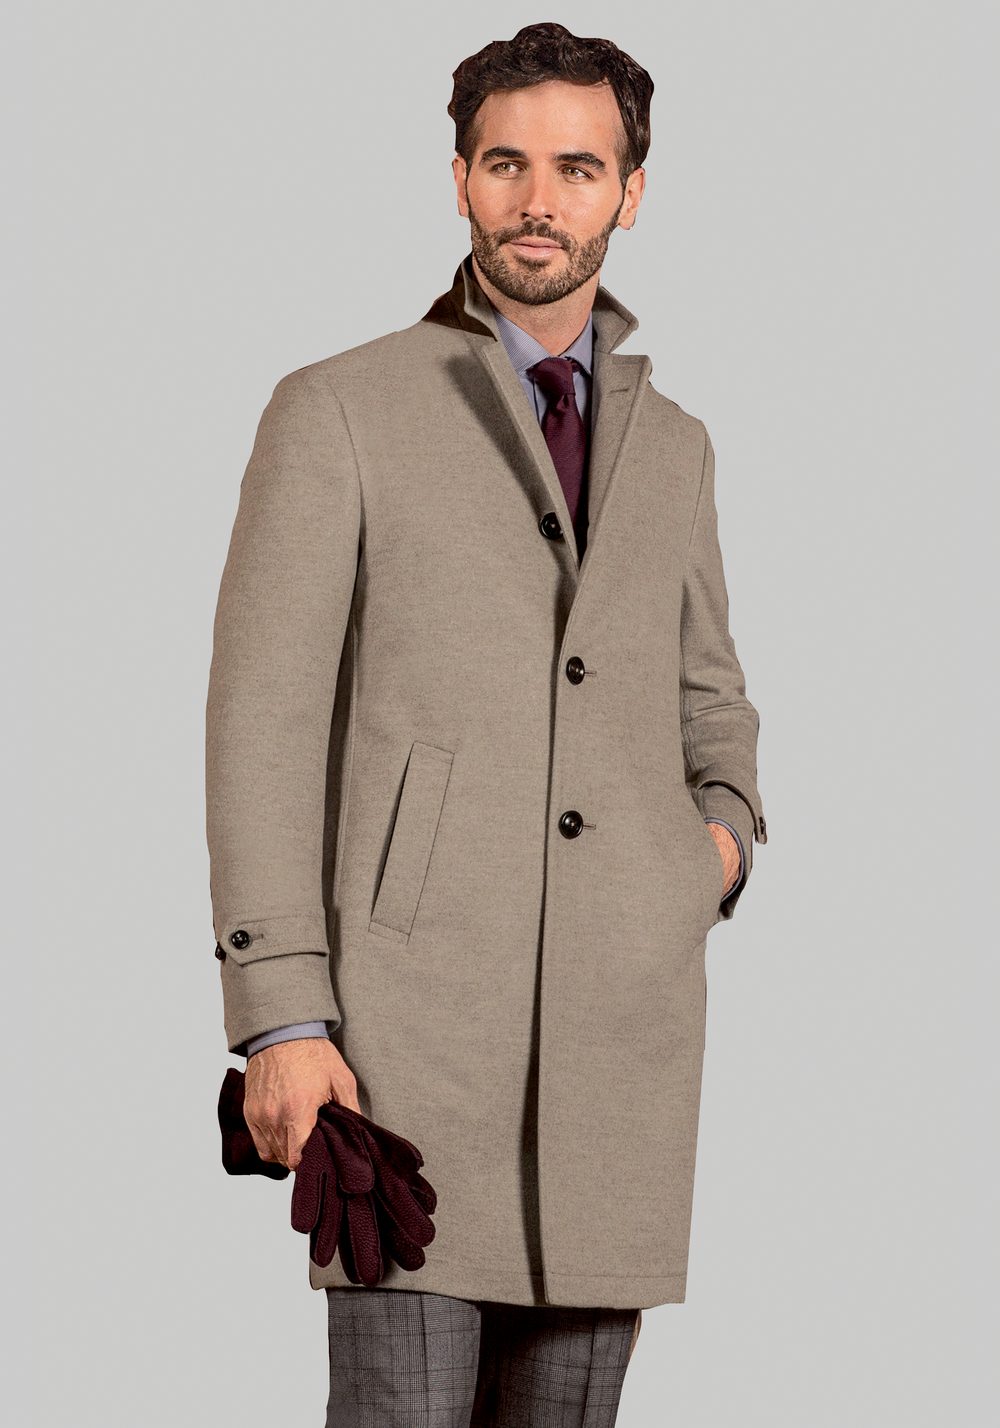 CUSTOM MADE OVERCOATS BY LABEL - Label Custom Clothing